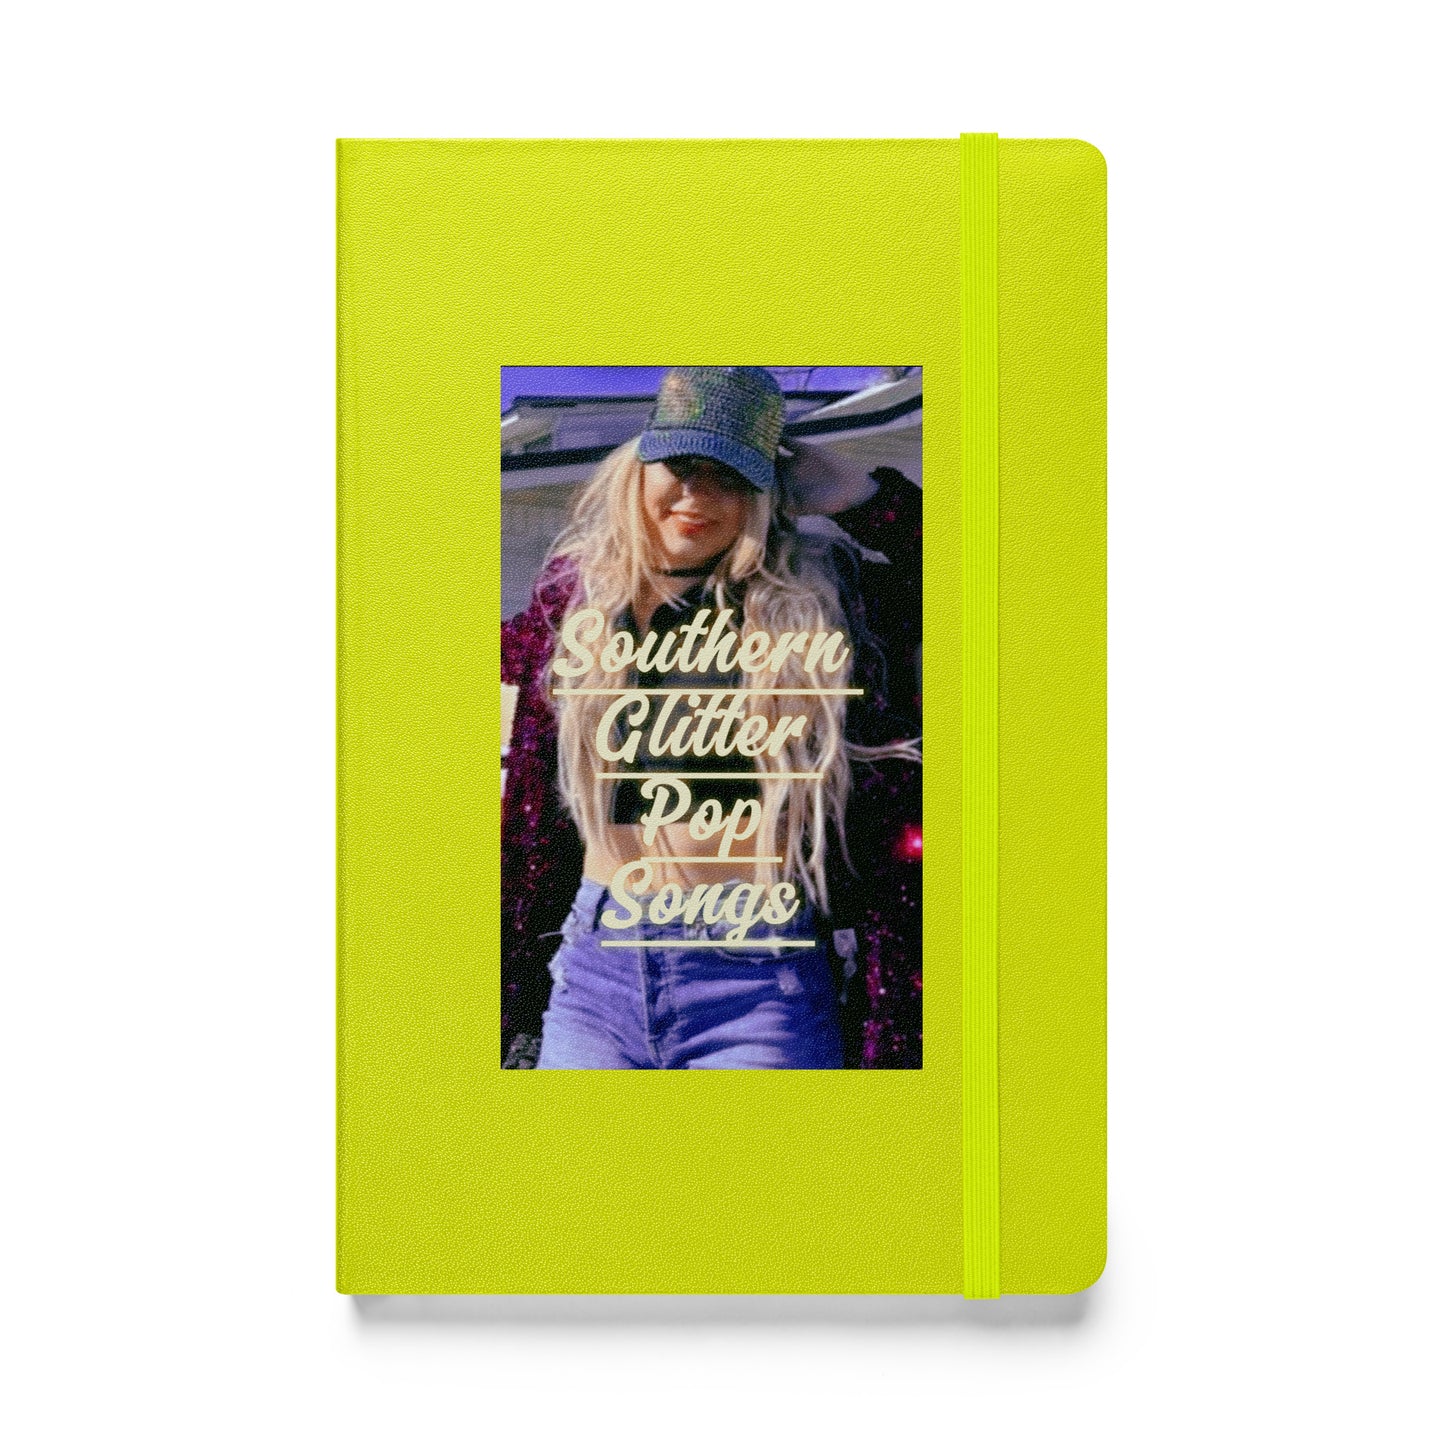 Southern Glitter Pop Songs Hardcover bound notebook